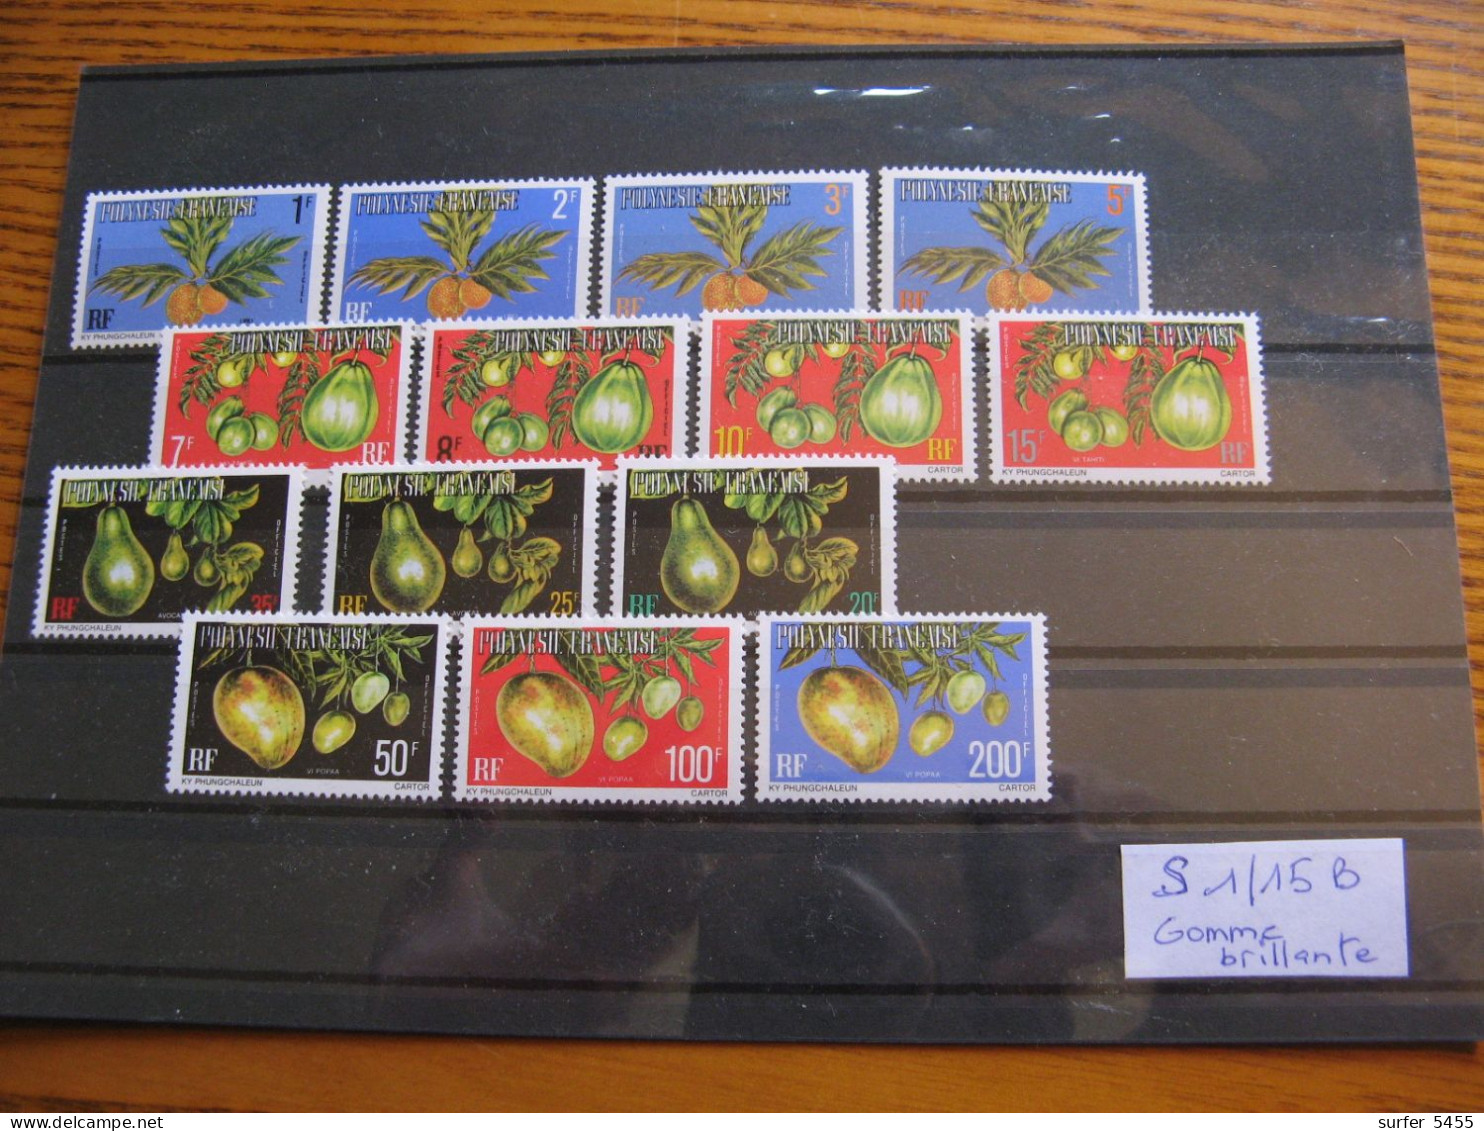 POLYNESIE YVERT SERVICE N°1/15B TIMBRES NEUFS** LUXE - MNH - GOMME MATE - SERIE COMPLETE - COTE 230,00 E - Neufs